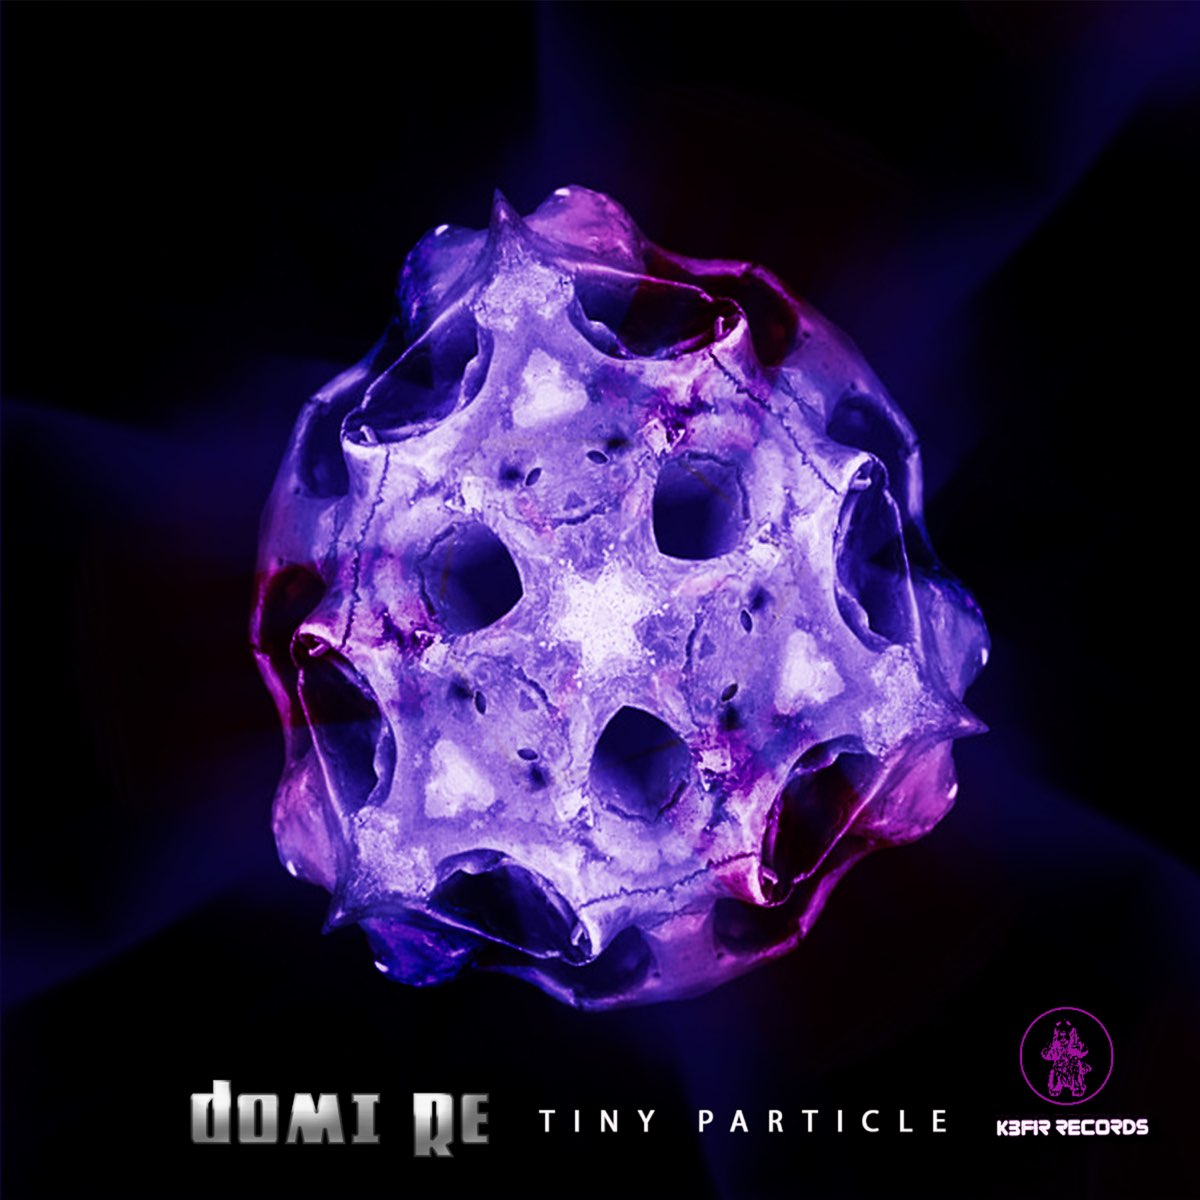 Tiny Particles. Every Single Particle. (Tiny Remix). Альбом тины